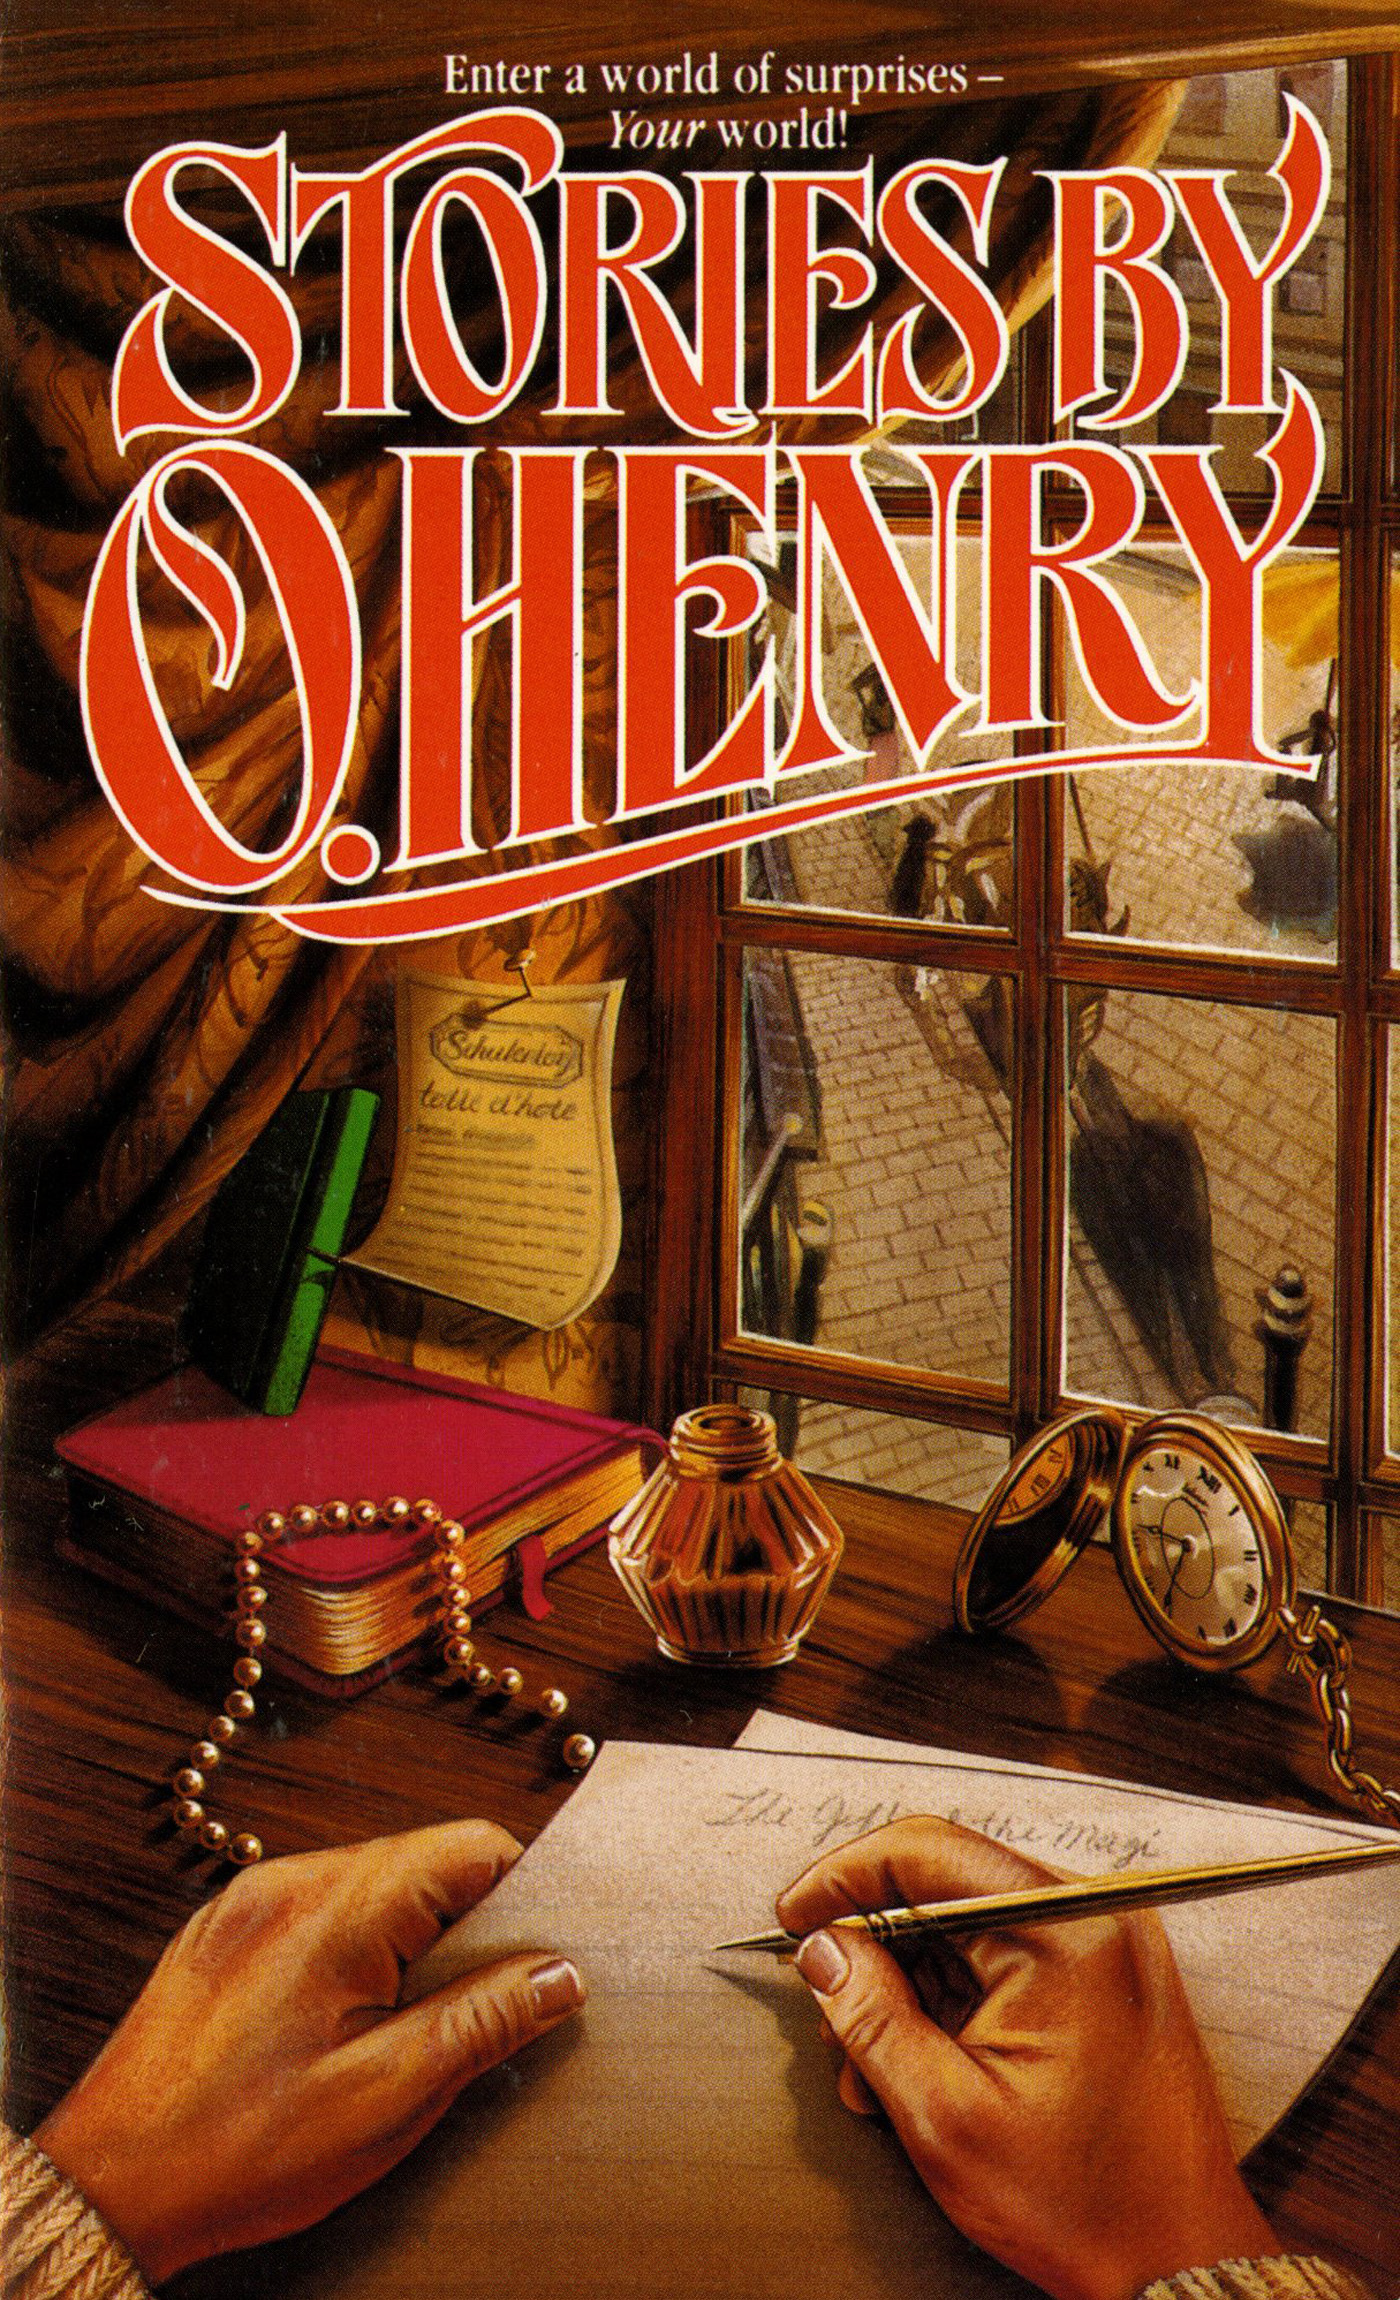 Stories by O. Henry by O. Henry